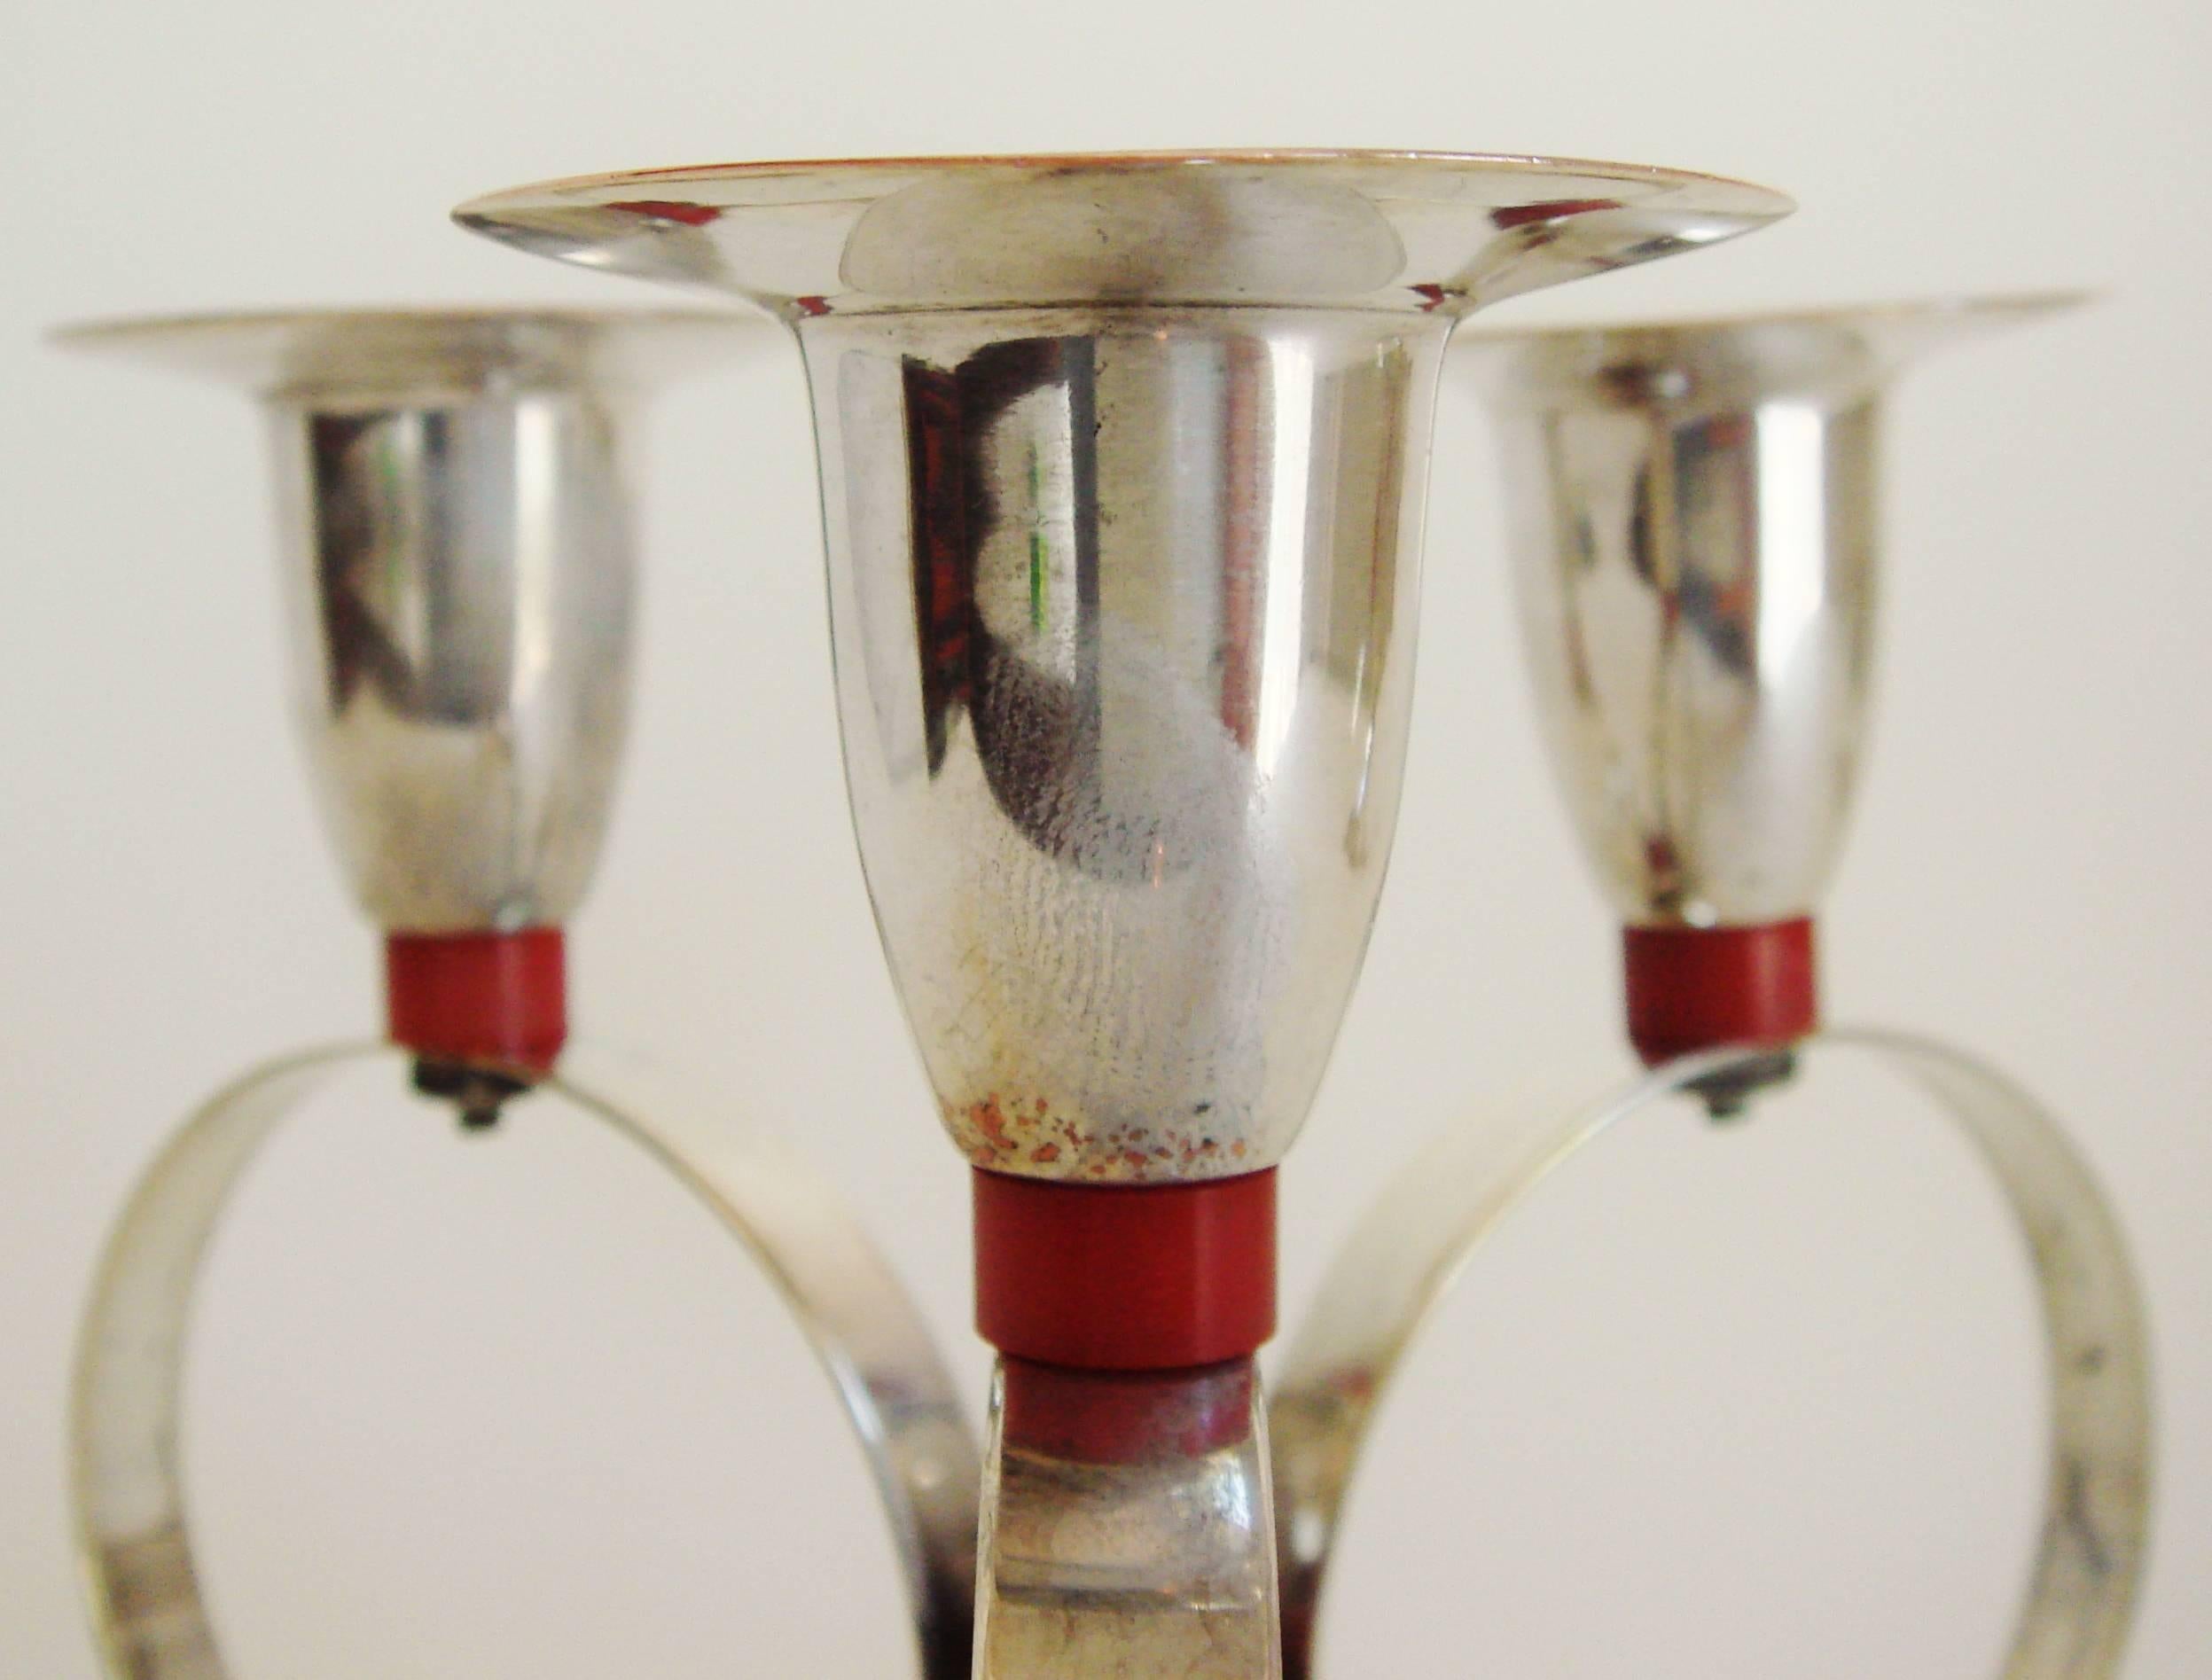 Molded Pair of American Art Deco Silver Plated Candleholders with Red Bakelite Accents For Sale